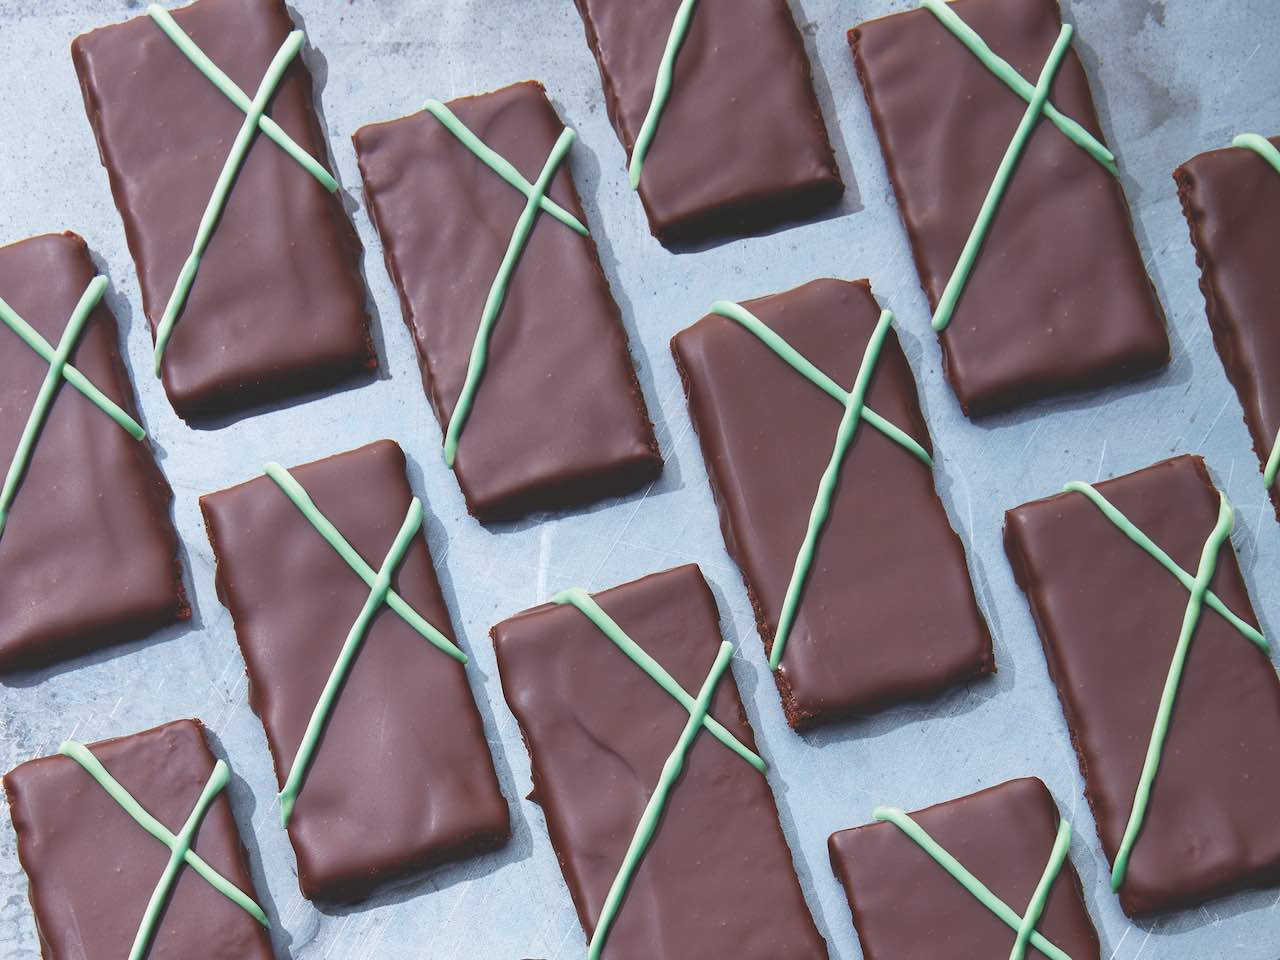 https://chatelaine.com/wp-content/uploads/2018/11/how-to-temper-chocolate.jpg